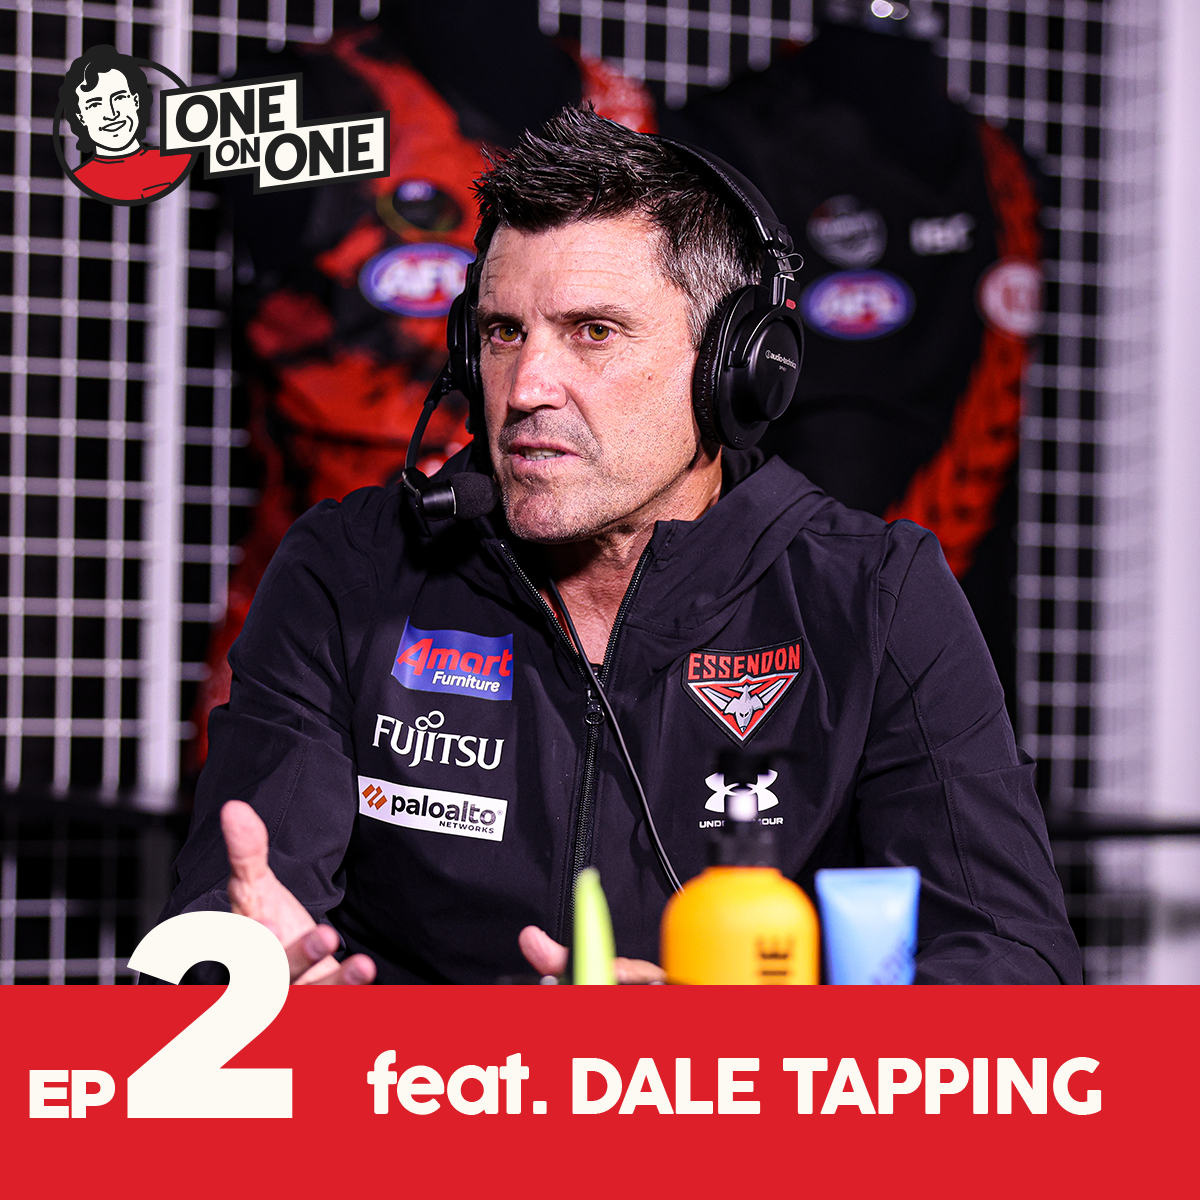 Dale Tapping - Dealing with cancer